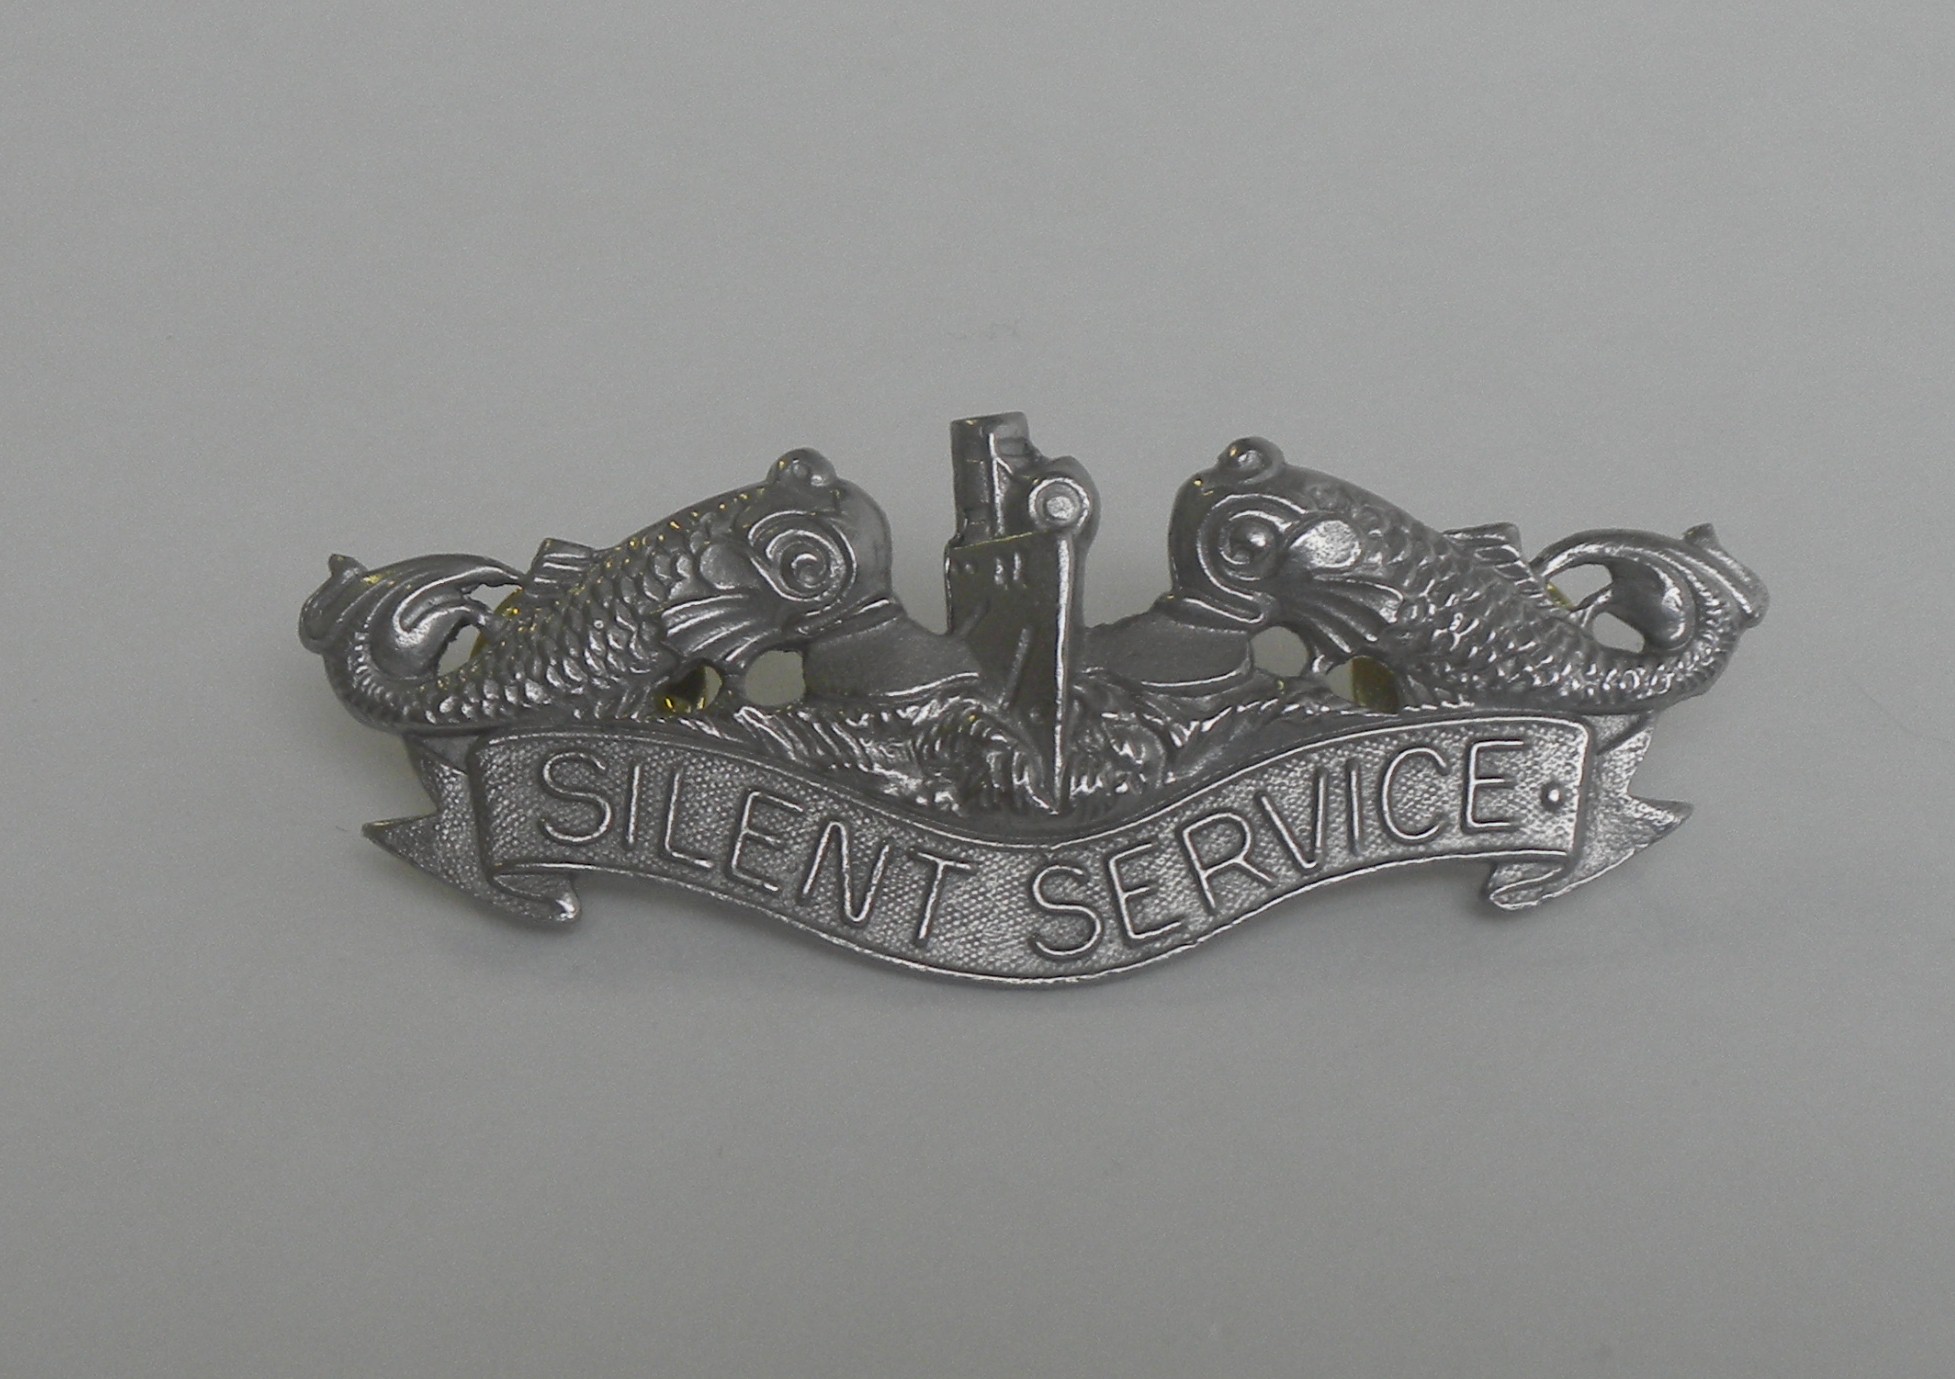 AMERICAN WW2 NAVY SUBMARINE SERVICE BADGE WITH SILENT SERVICE RIBBON